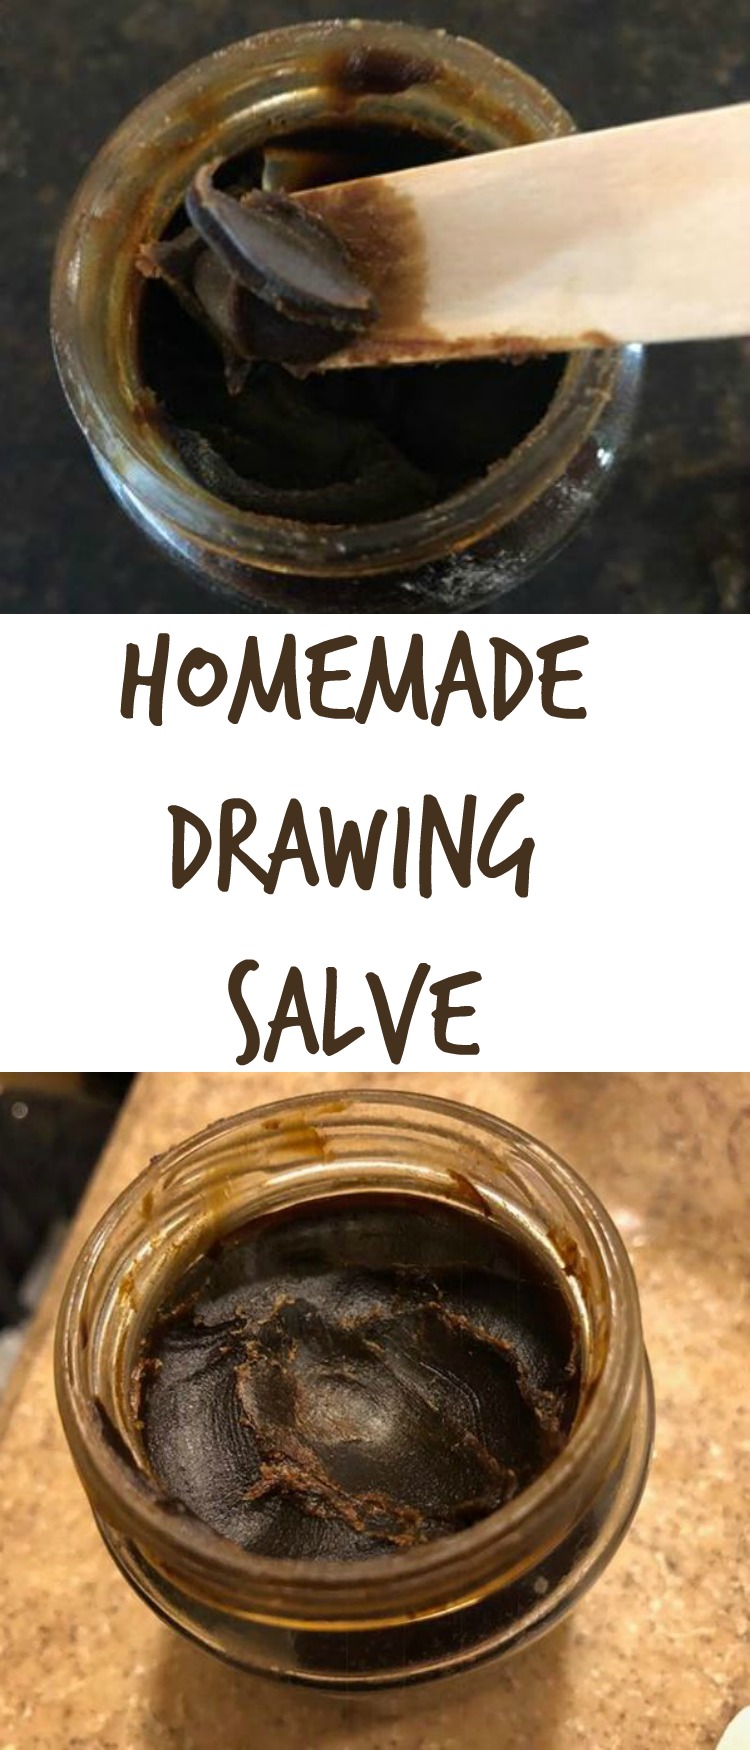 Top How Does Black Drawing Salve Work of all time Check it out now 